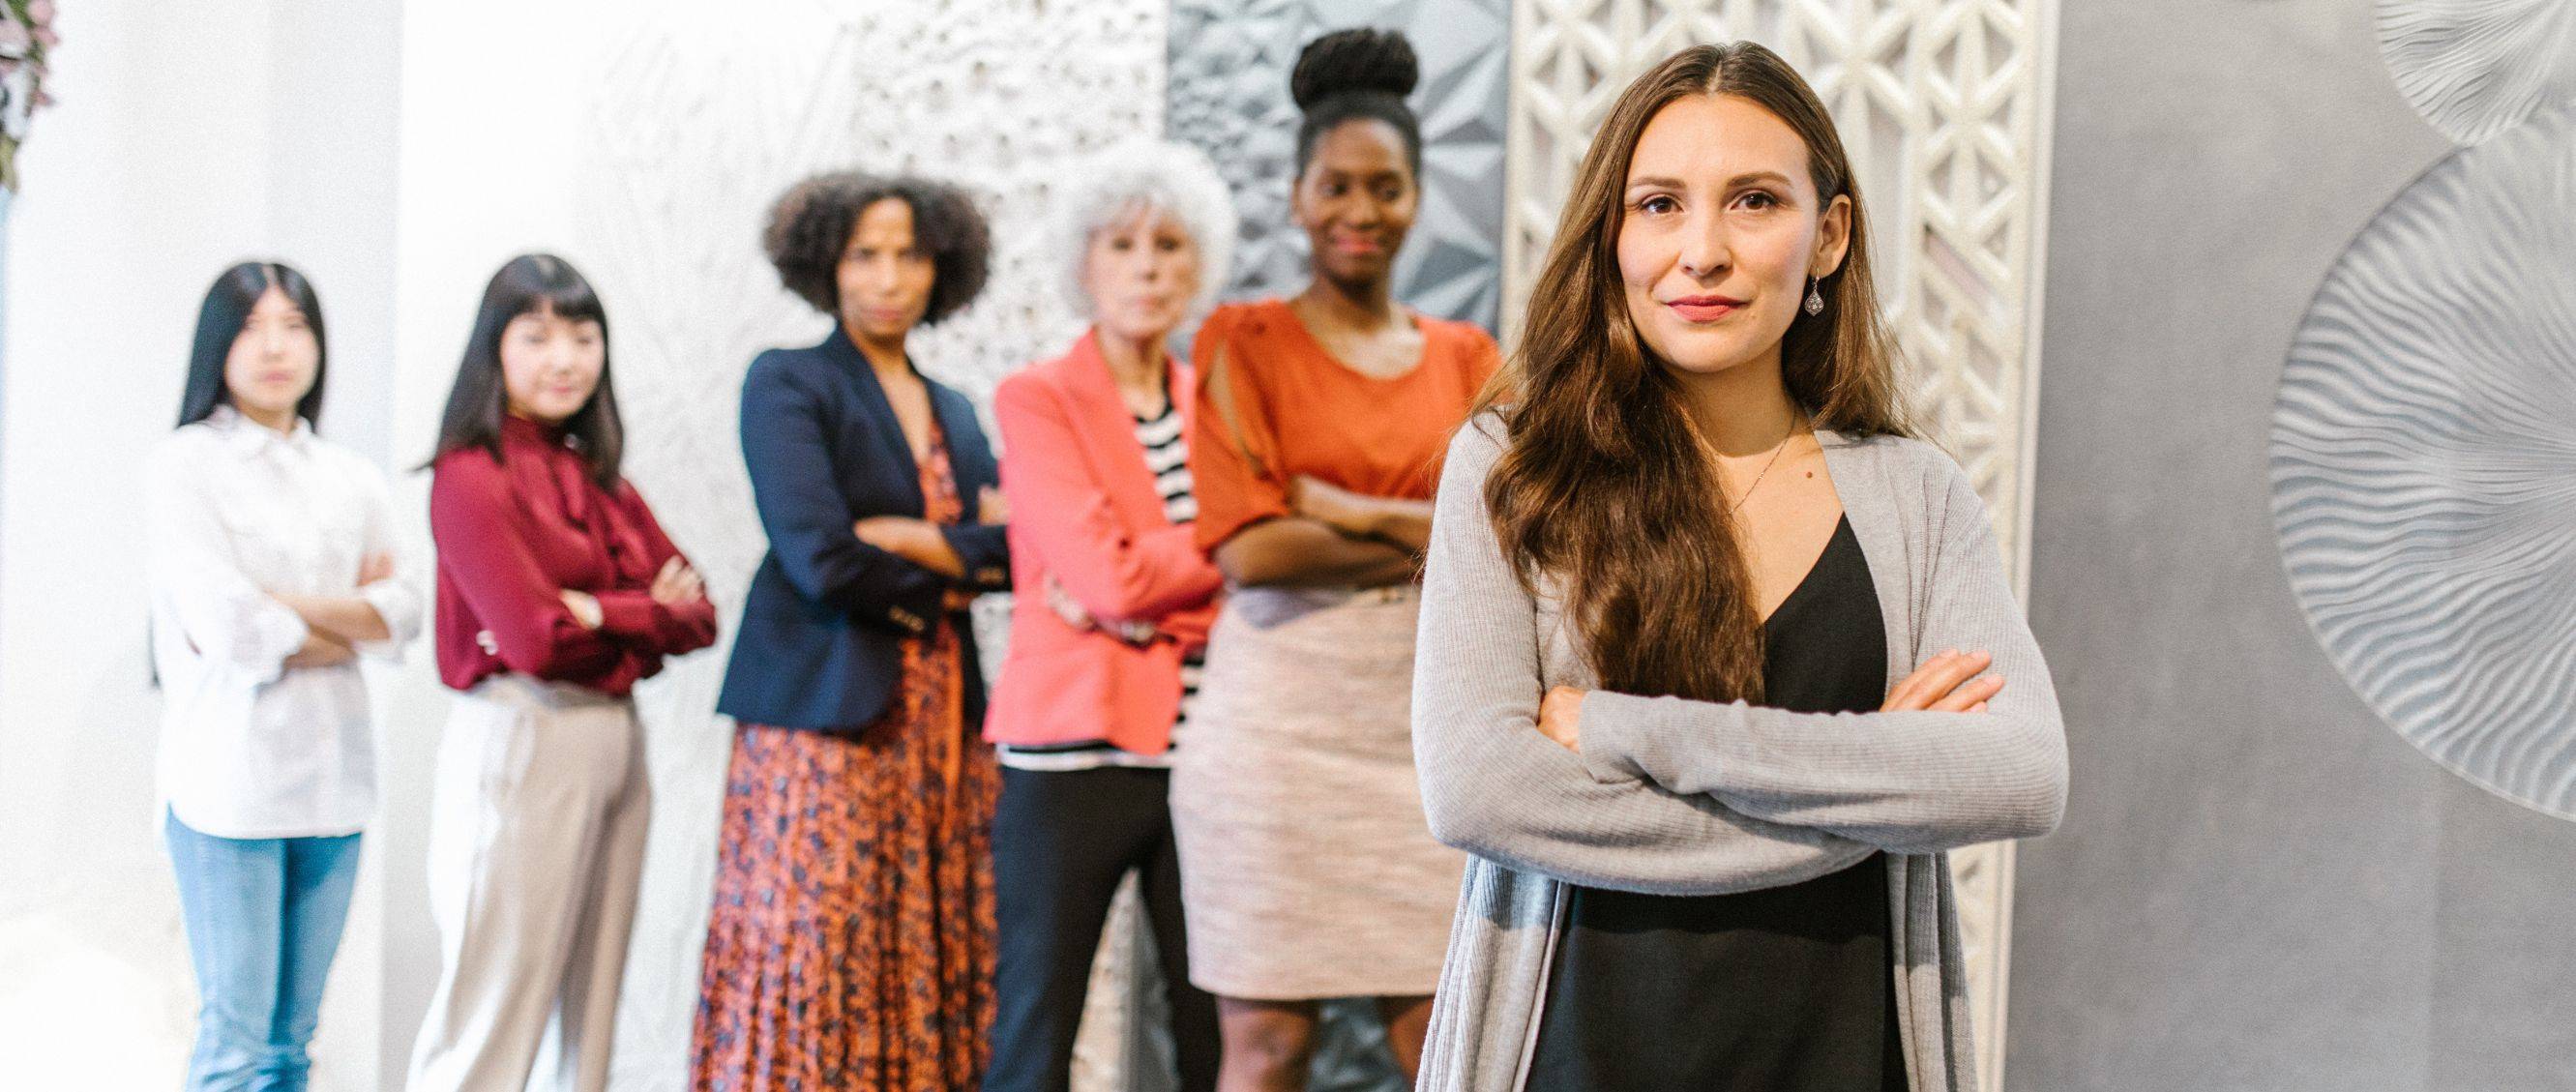 6 Confident diverse women standing in a line